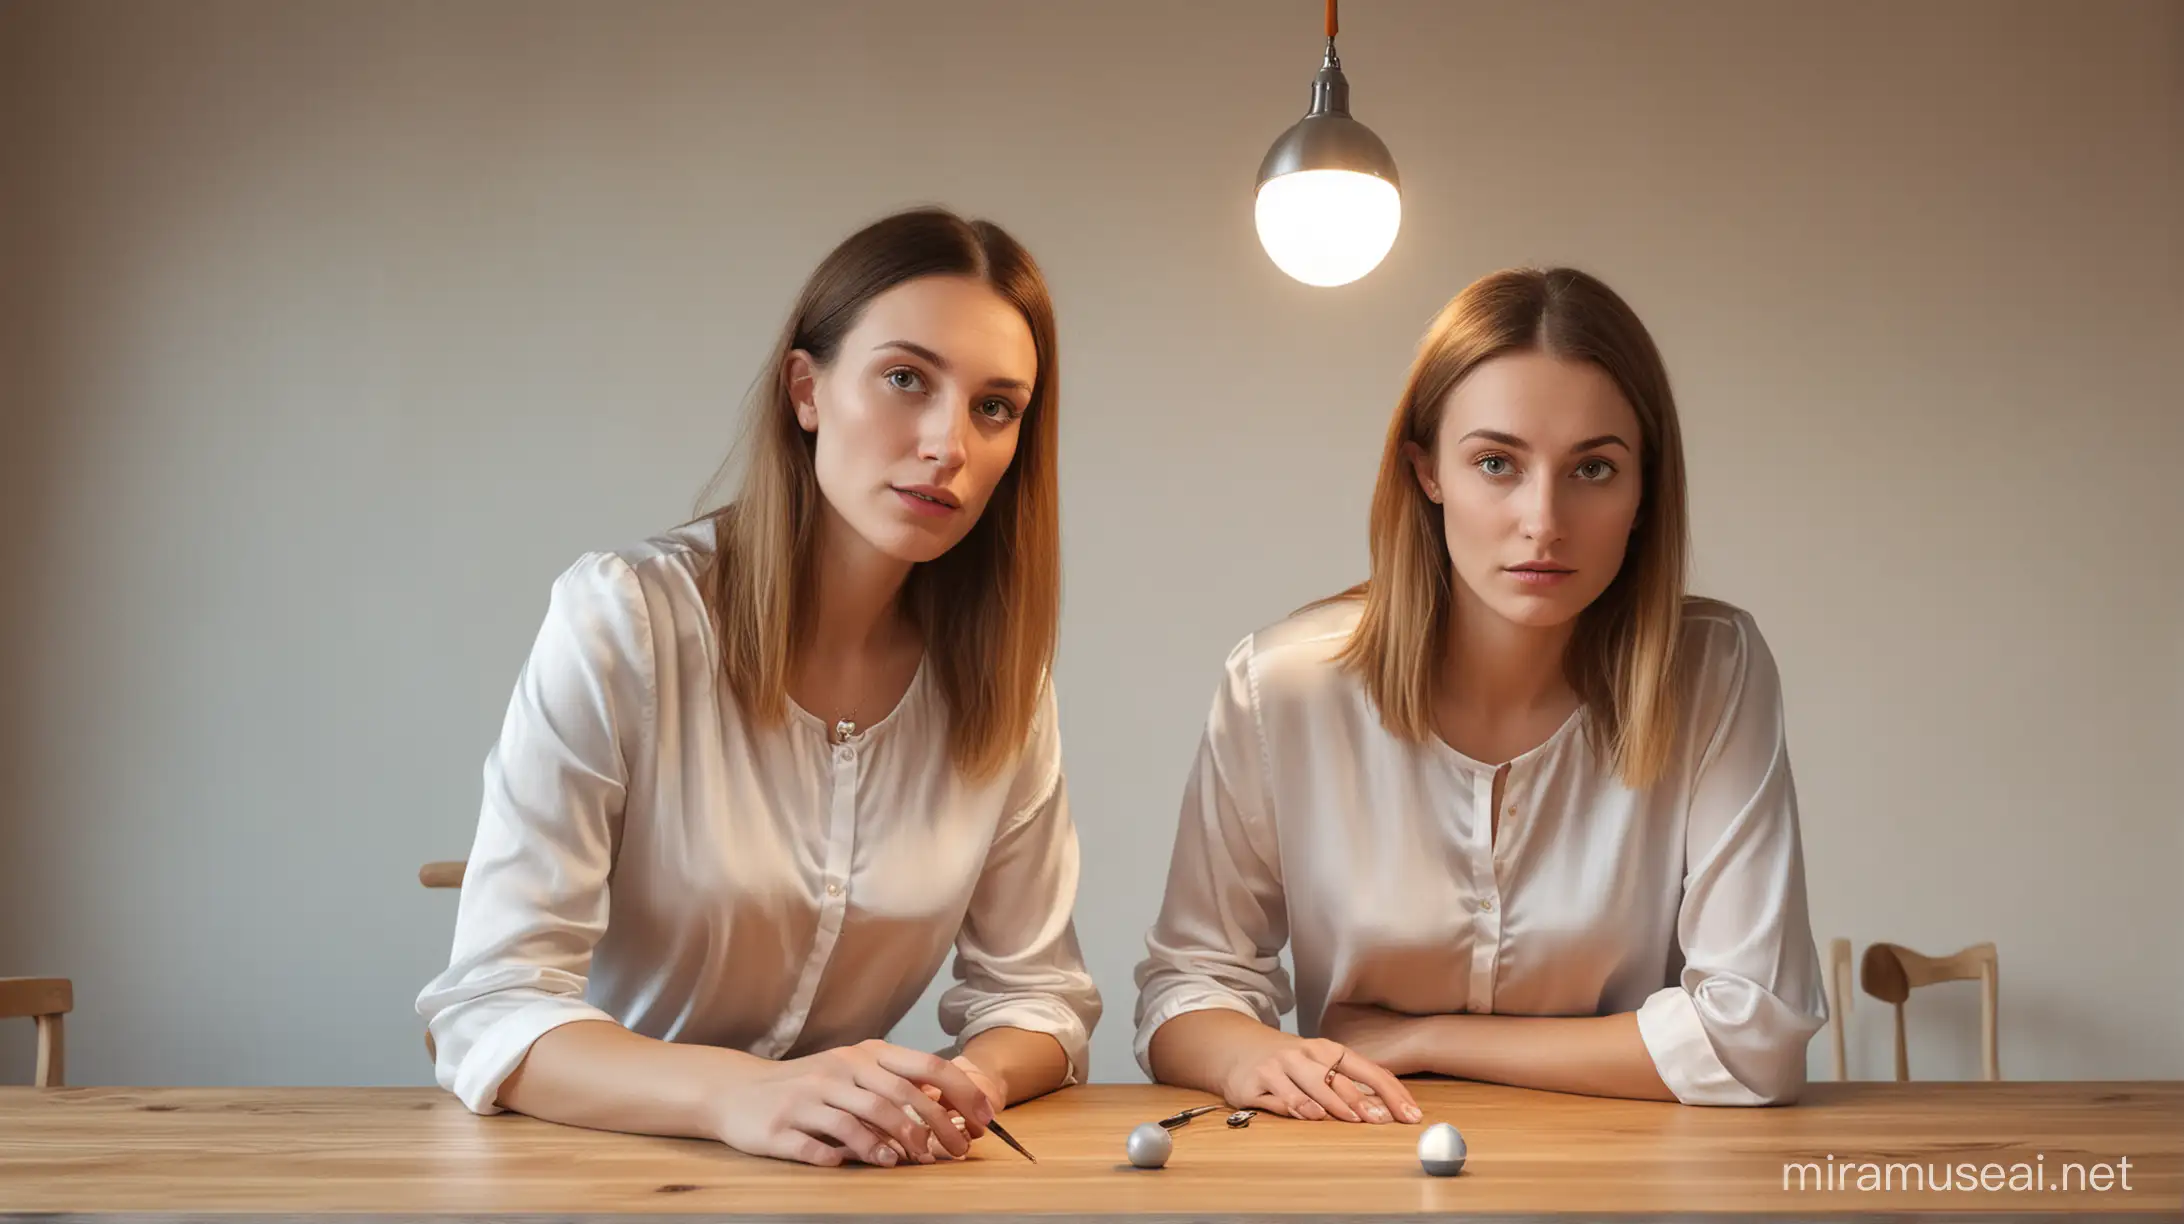 Realistic Portrait of Two Women with ColdLike Features Working at Round Wooden Table